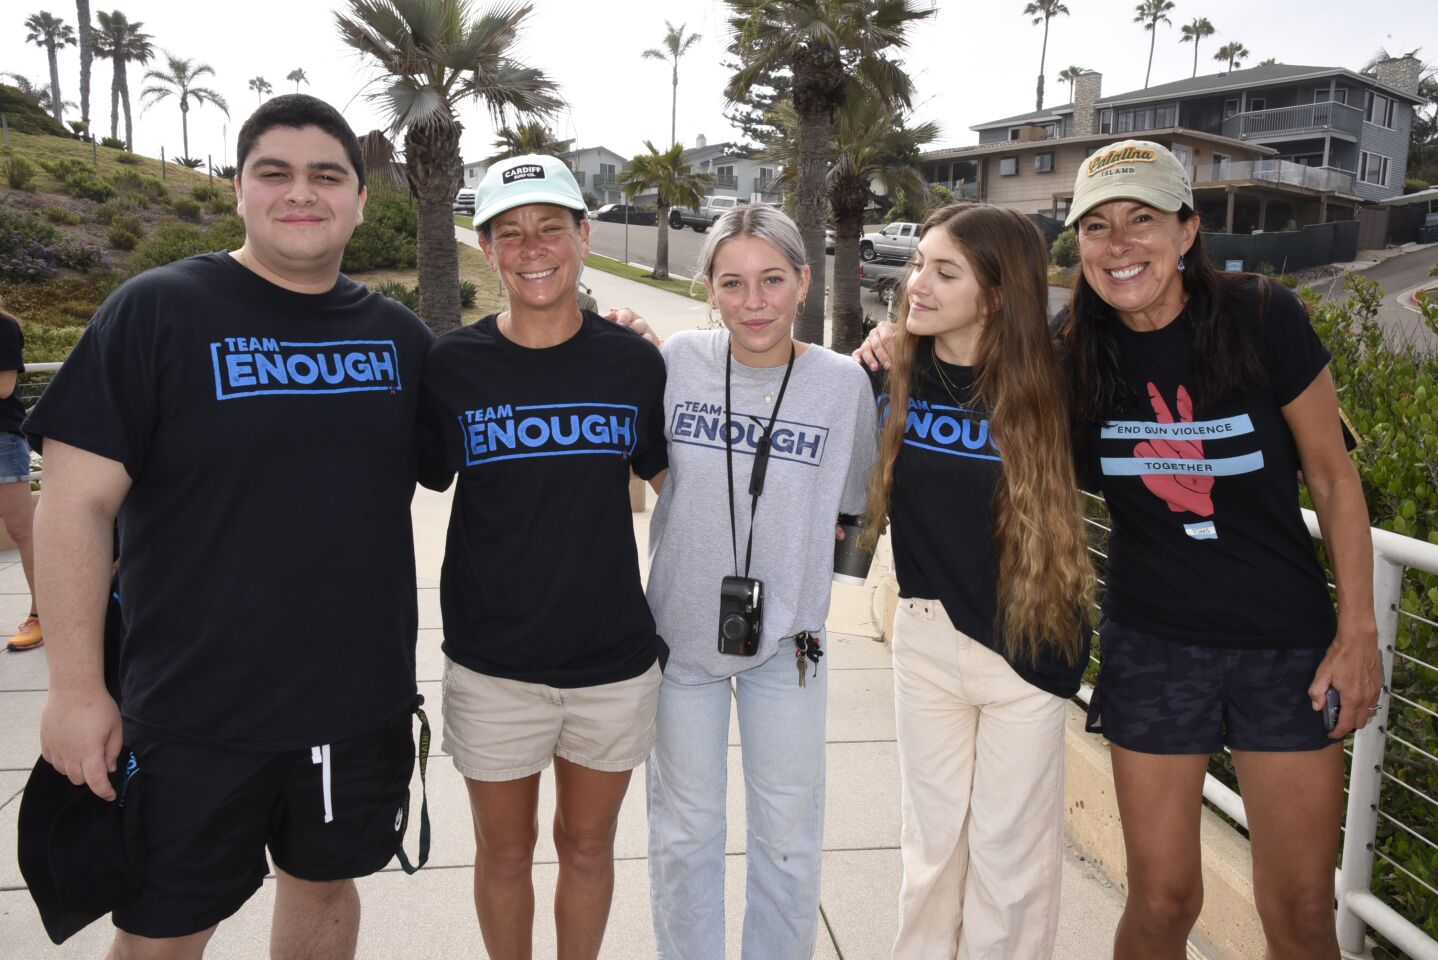 Team Enough National Chapter Coordinator/event co-organizer Stephan Abrams, Grauer teacher Tricia Valeski, event co-organizers Lucy Stockton and Tahlia Fisch, North County San Diego Team Enough participant Kara Chine